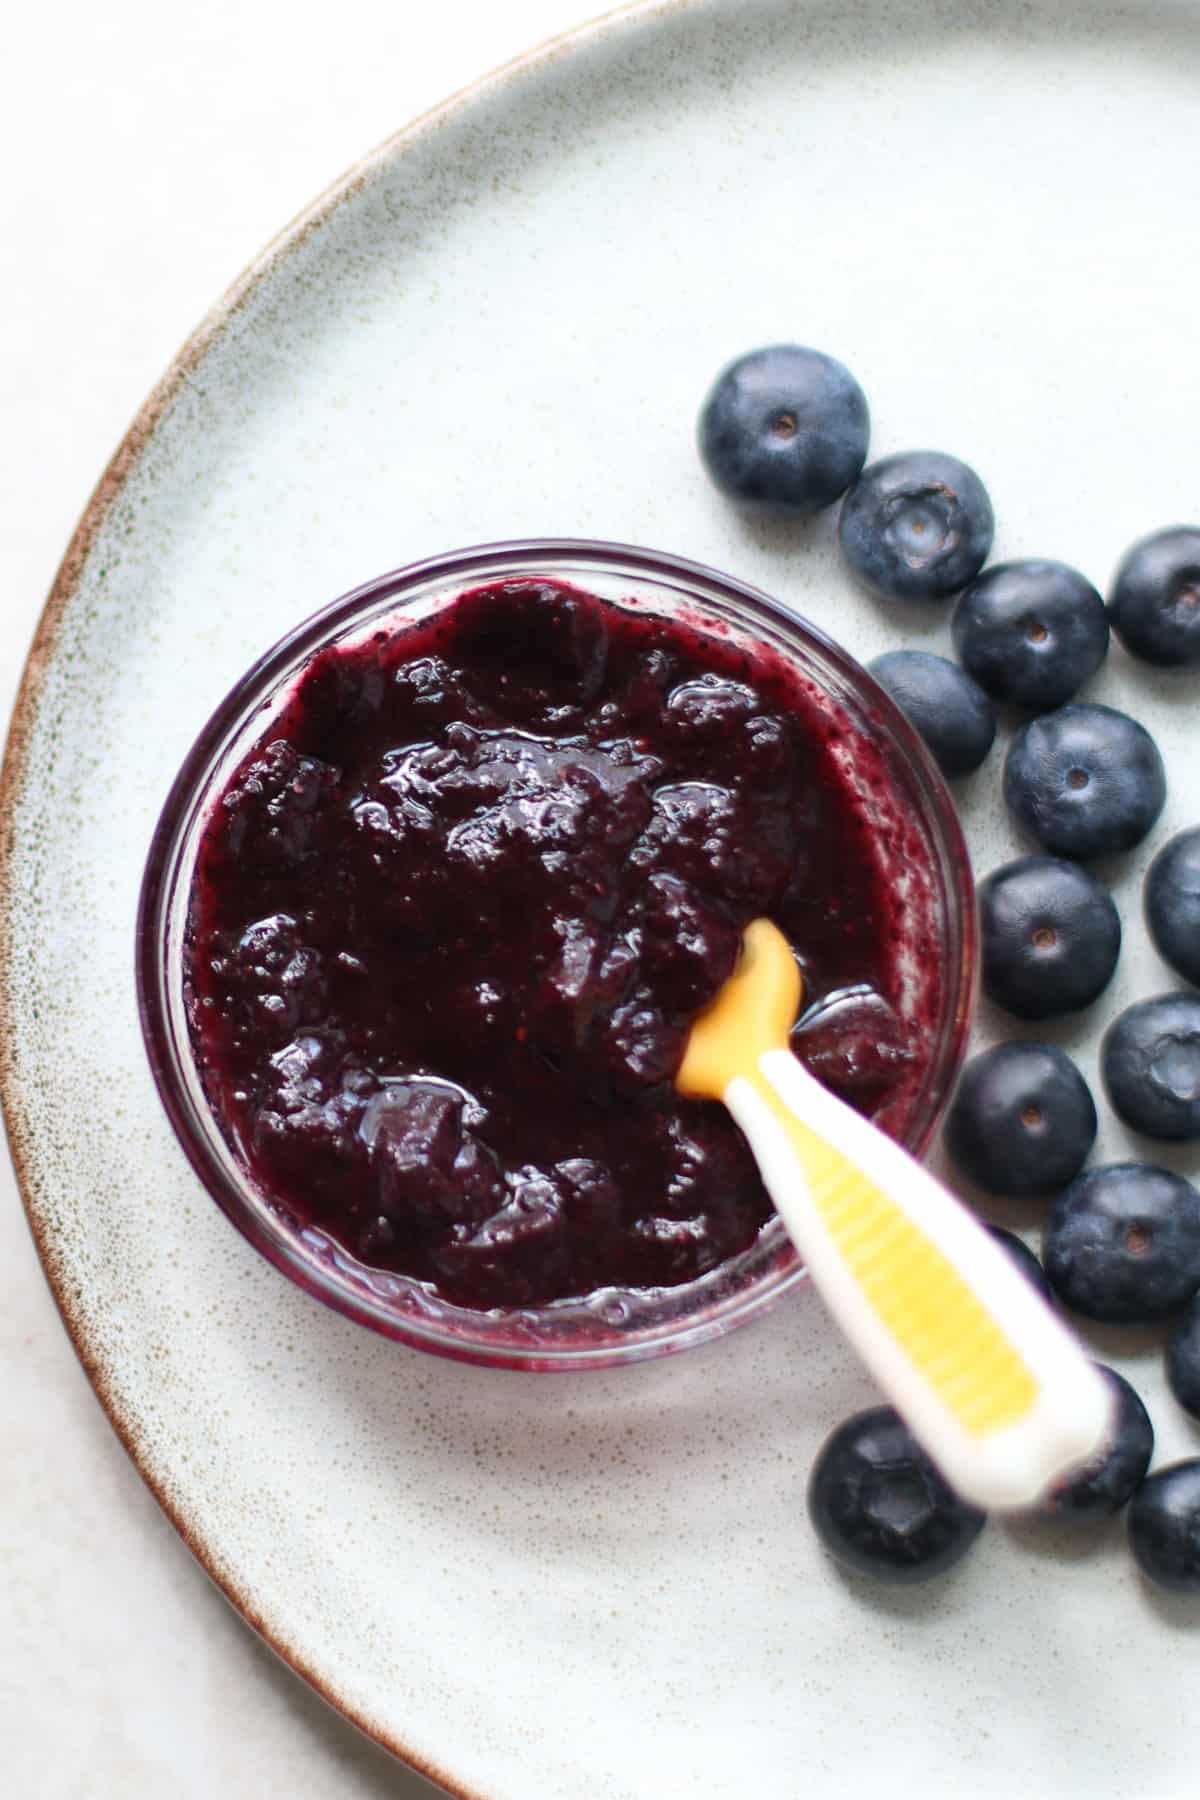 Blueberry puree in a small bowl with a baby spoon.